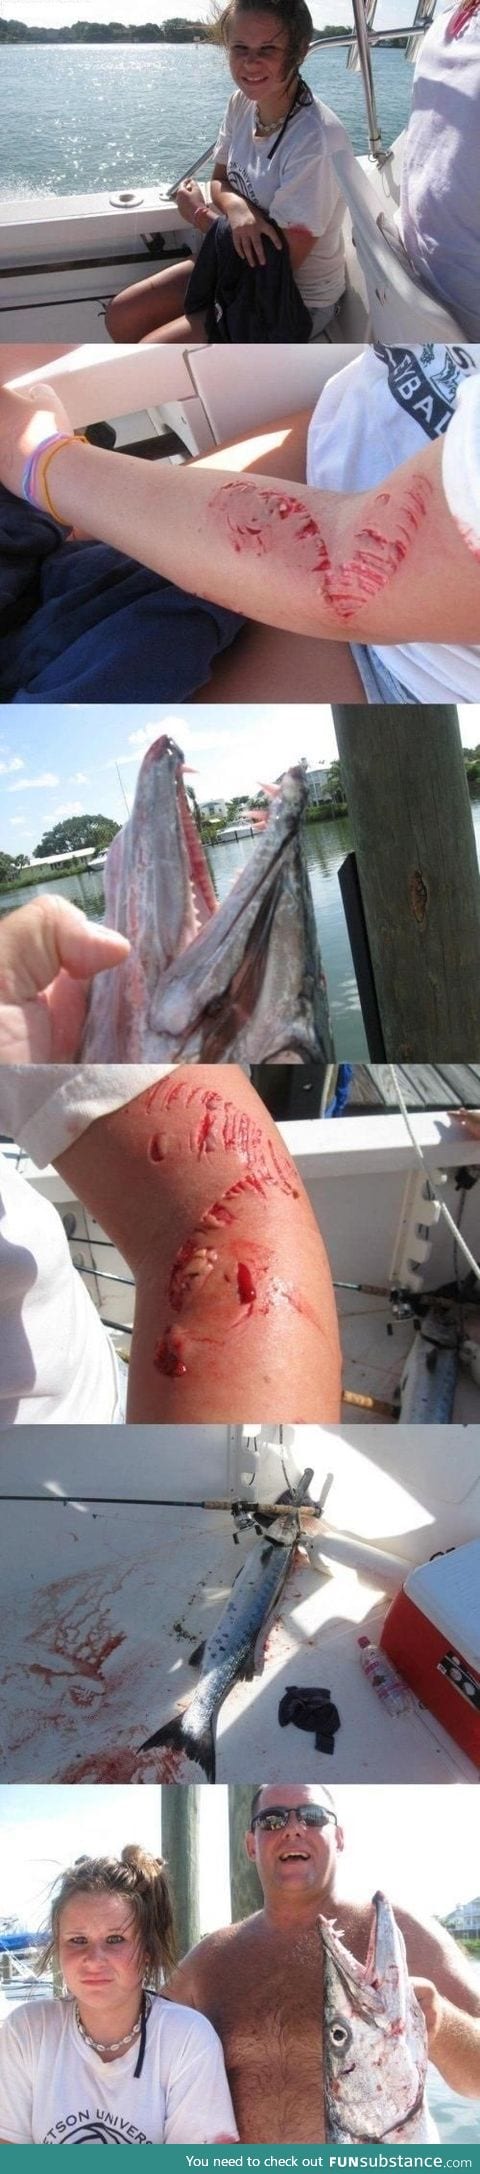 Go fishing with dad they said